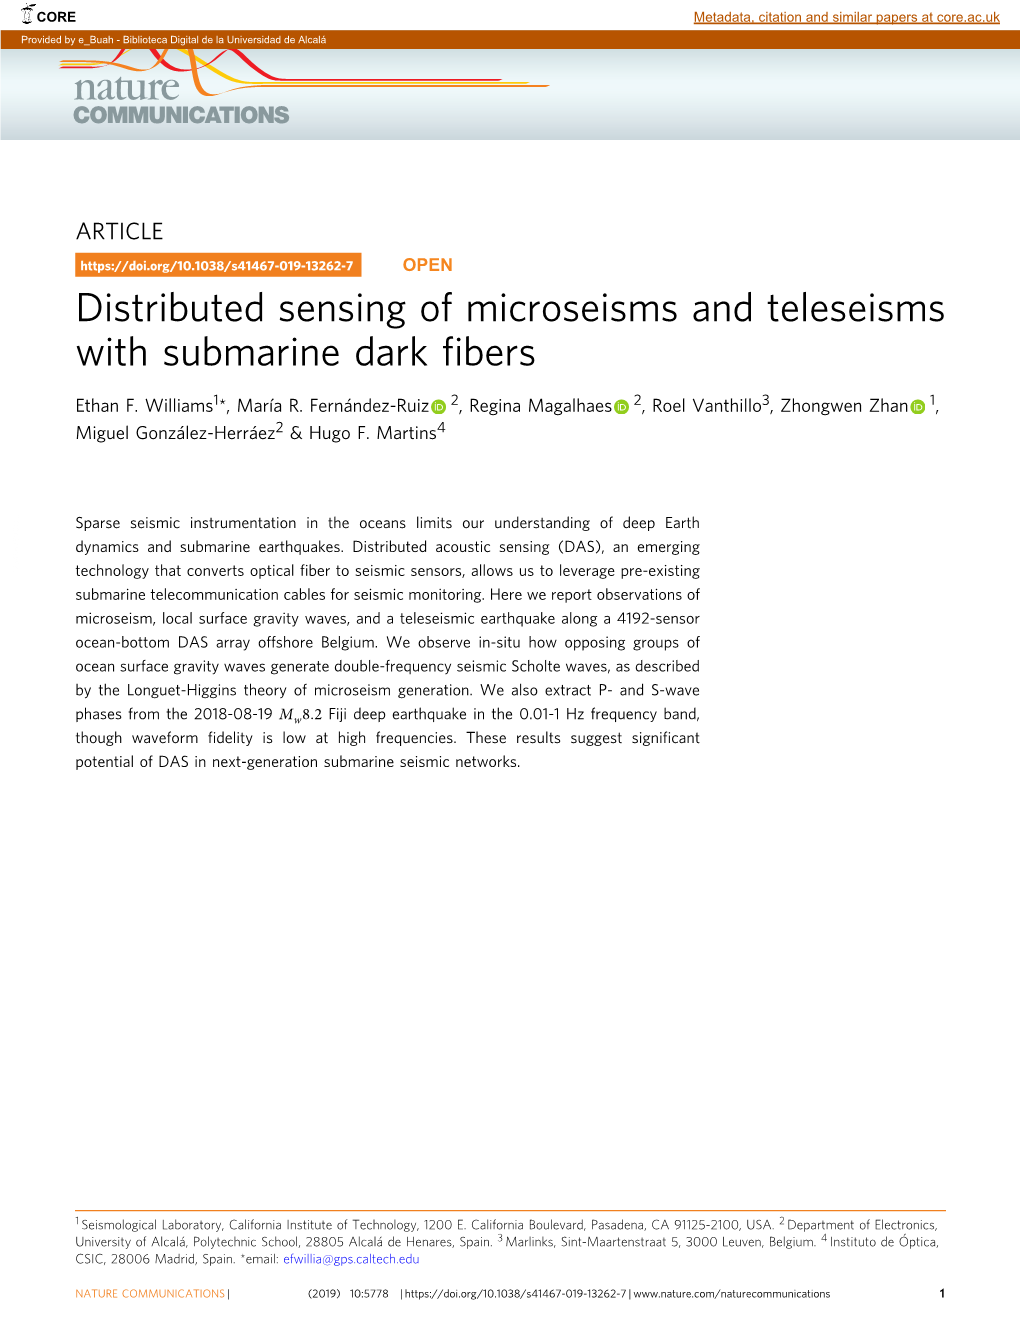 Distributed Sensing of Microseisms and Teleseisms with Submarine Dark ﬁbers